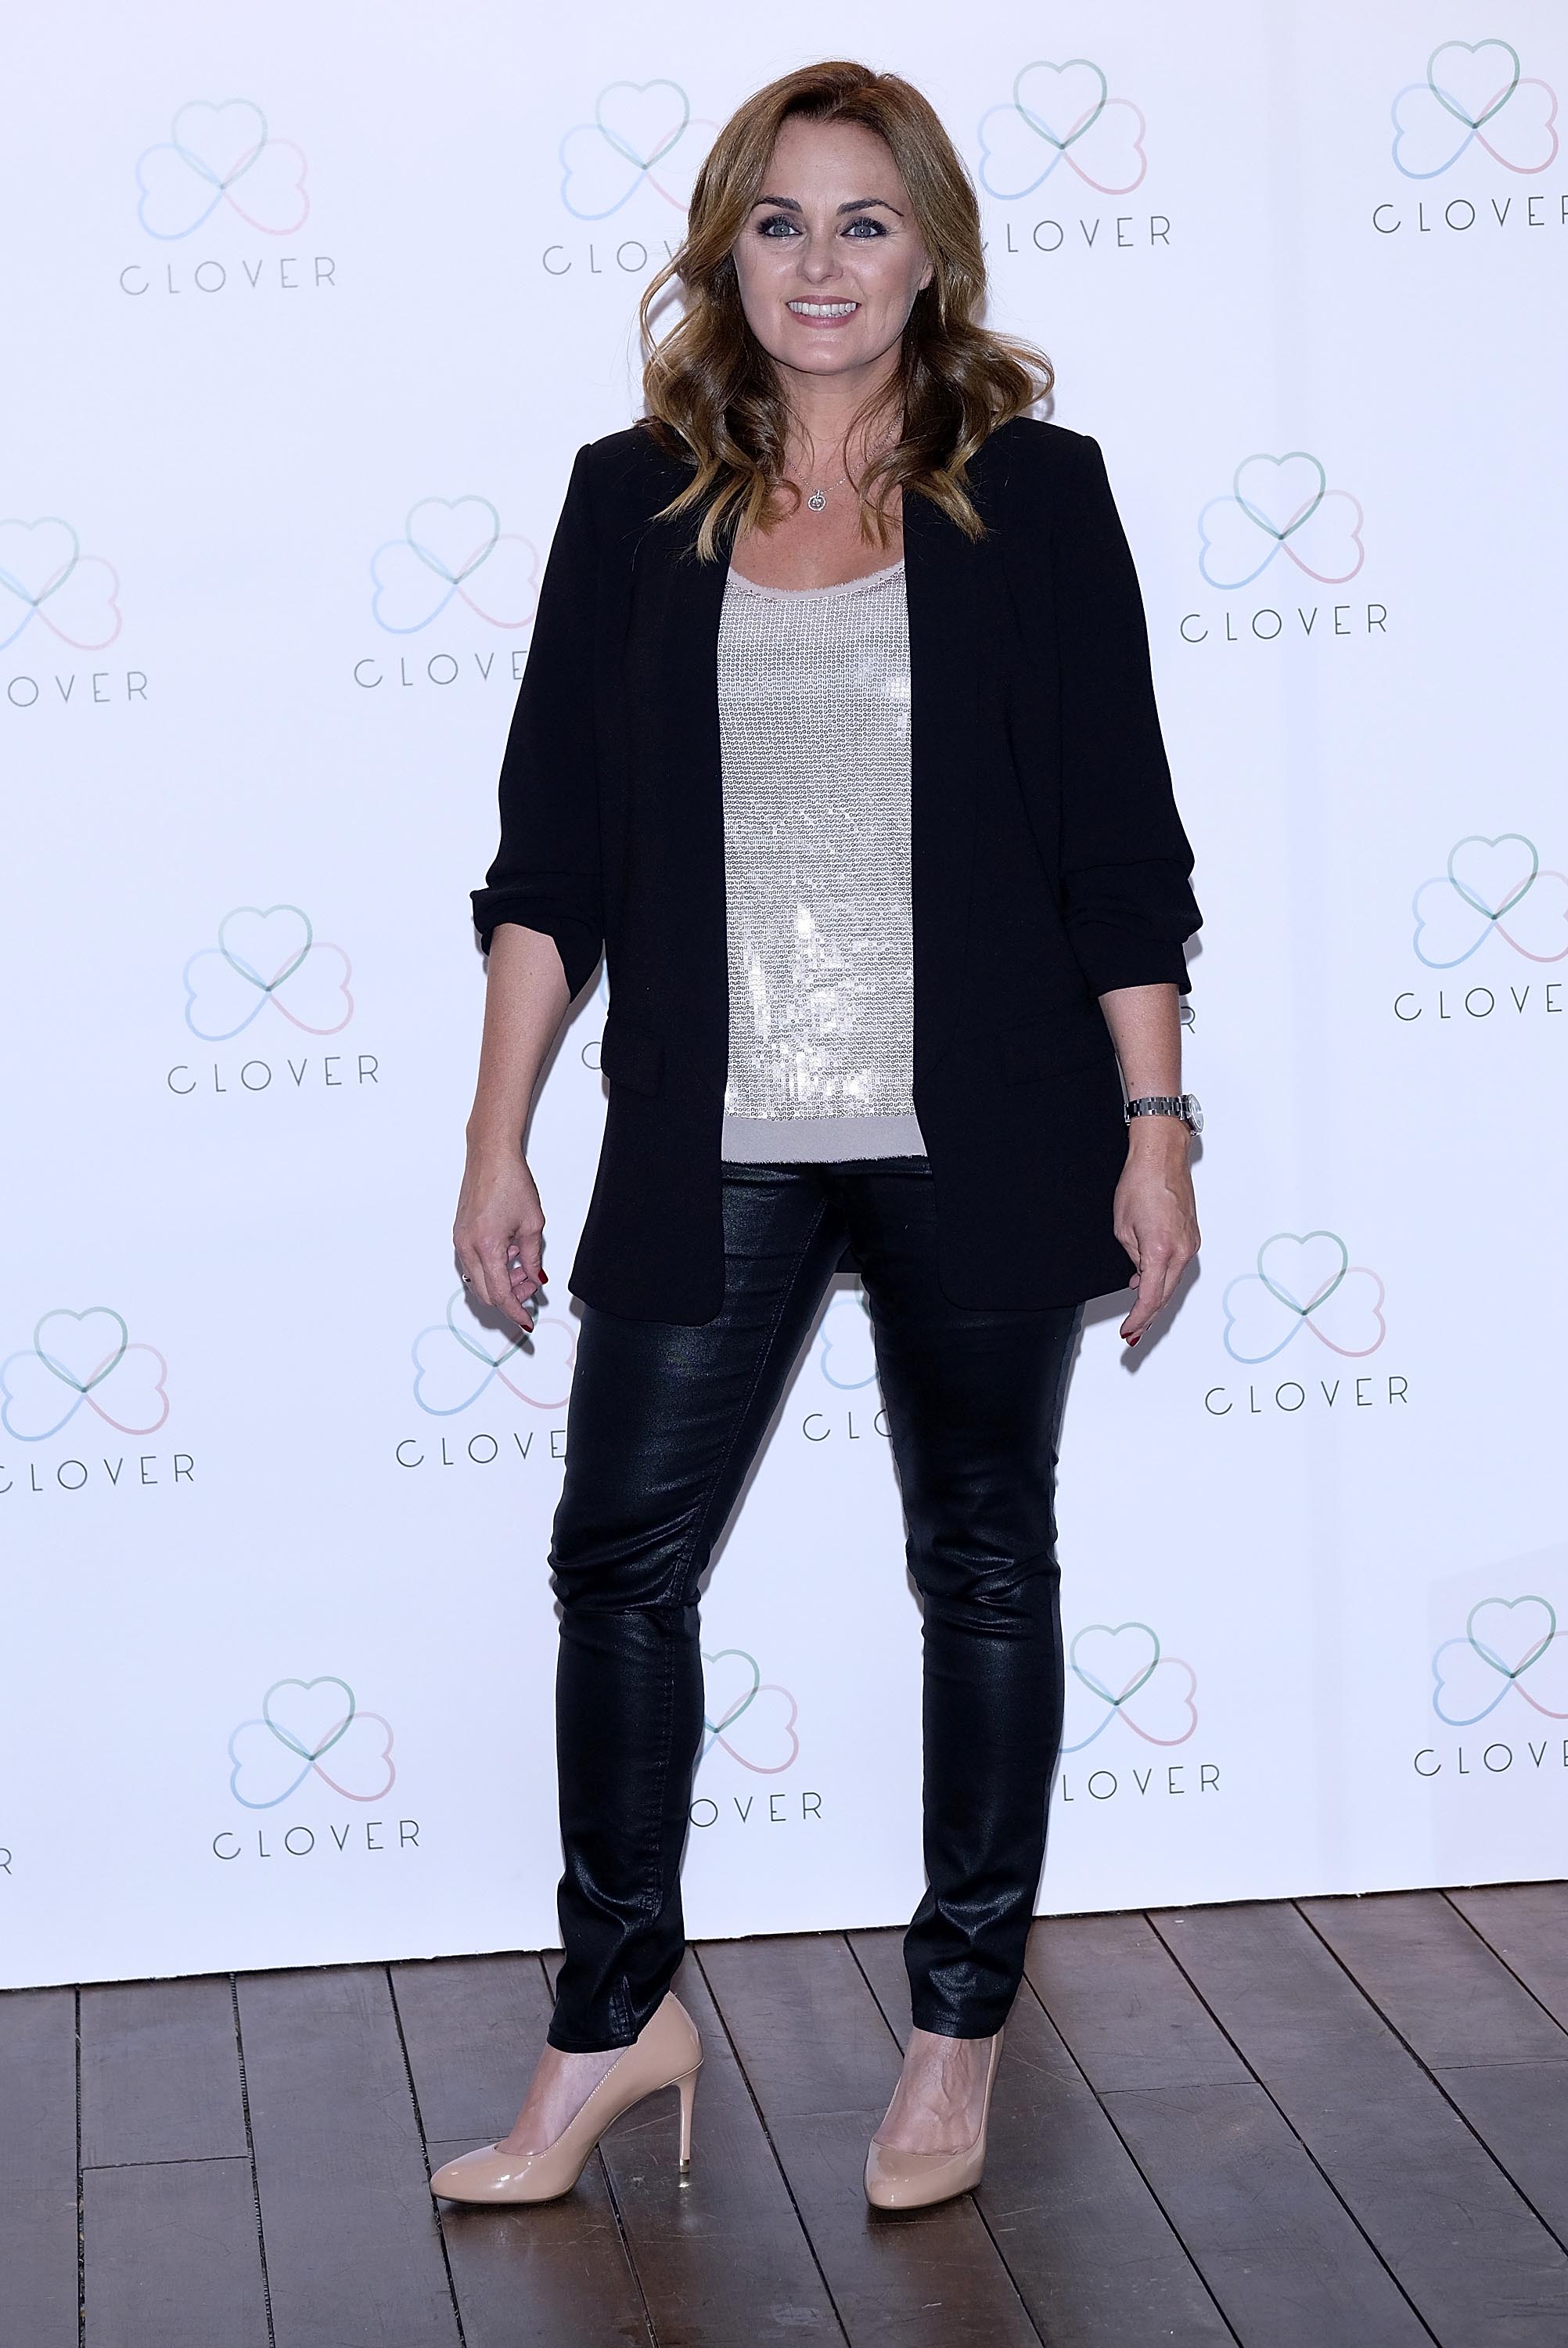 Carmen Morales attends the Clover events agency presentation